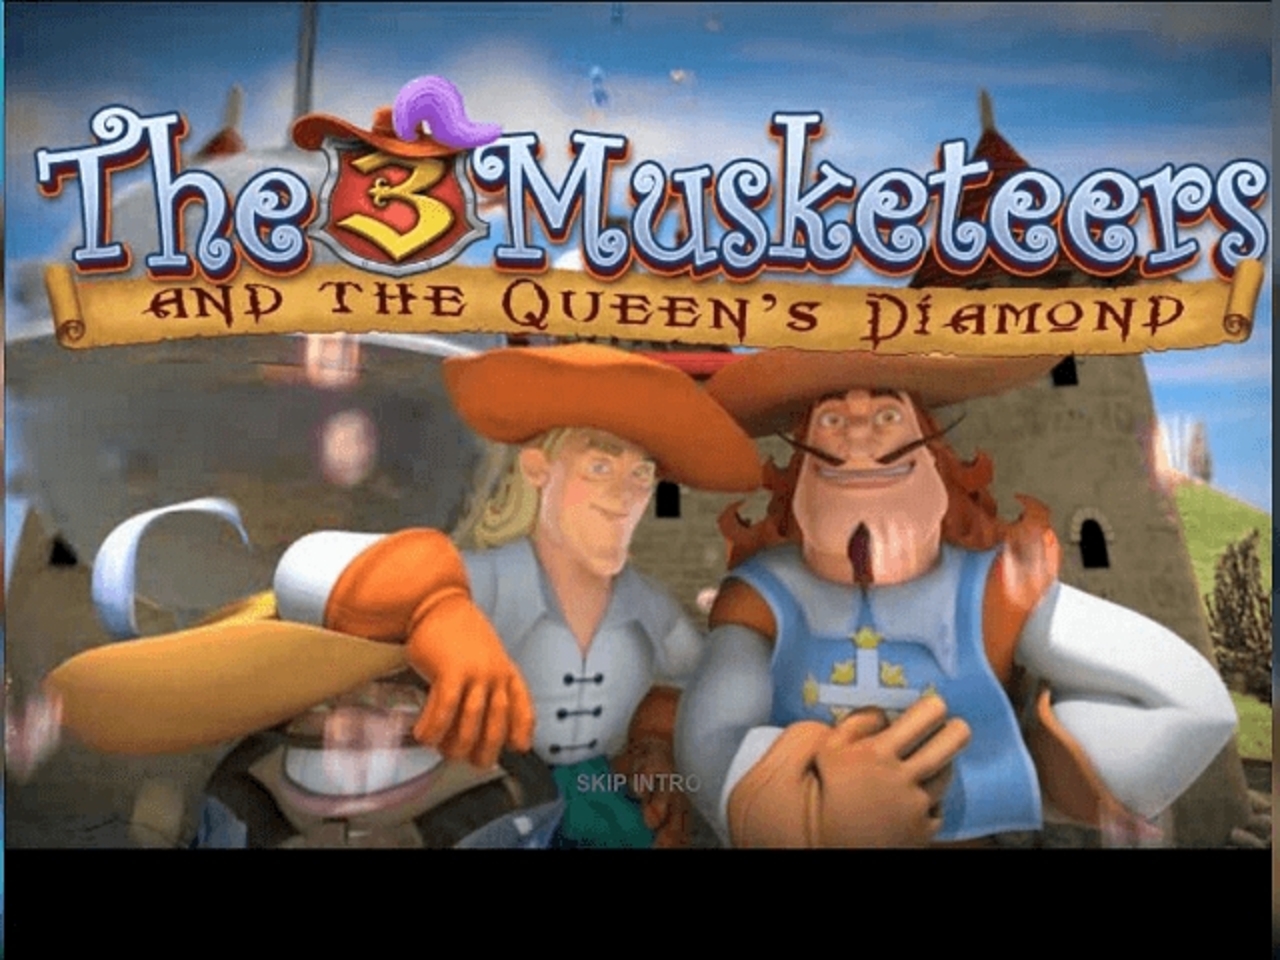 The The Three Musketeers and the Queen's Diamond Online Slot Demo Game by Playtech